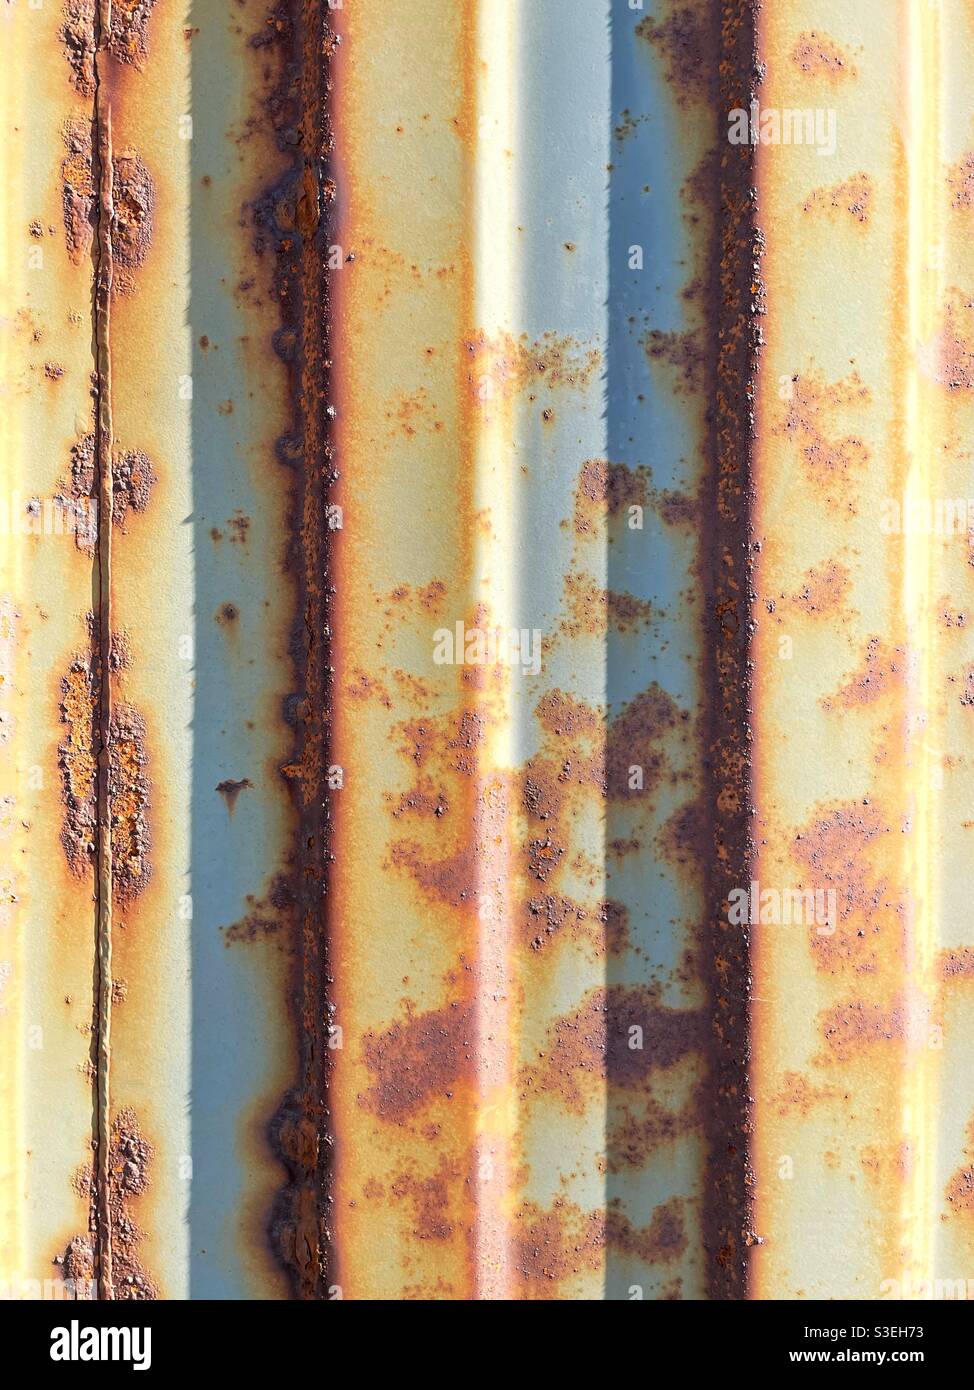 Rusted metal shipping container detail Stock Photo